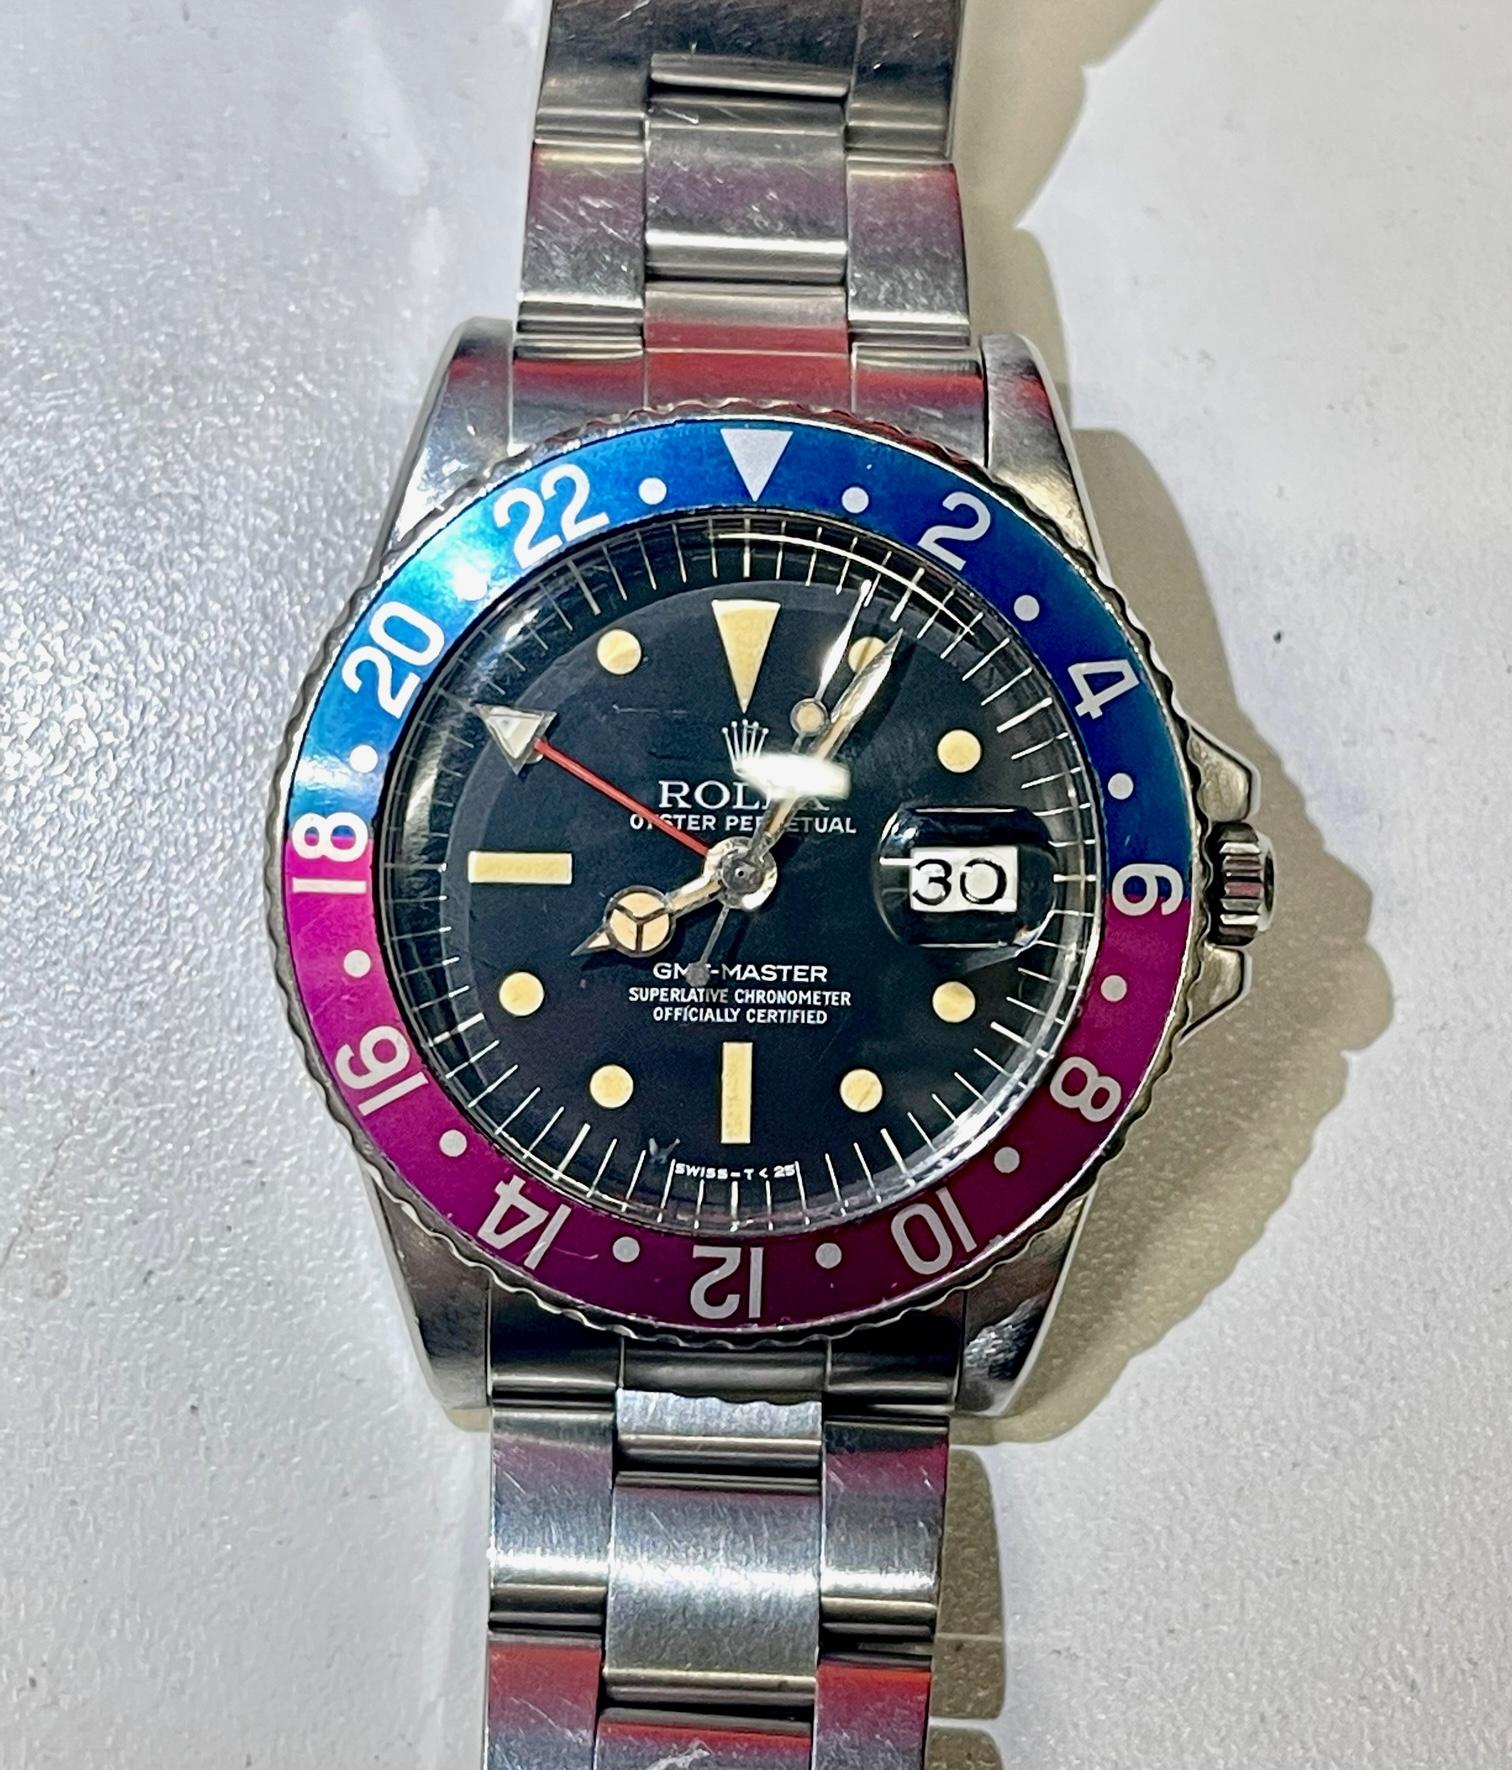 ROLEX GMT-MASTER PEPSI BEZEL REF. 1675 MINT VINTAGE C. 1966

ITEM DESCRIPTION: 
One Rare Vintage Rolex GMT Master Pepsi Bezel R#1675 Wristwatch. It has the Serial Number 130XXXX dating it to 1966, almost 50 years ago! The watch appears to be in